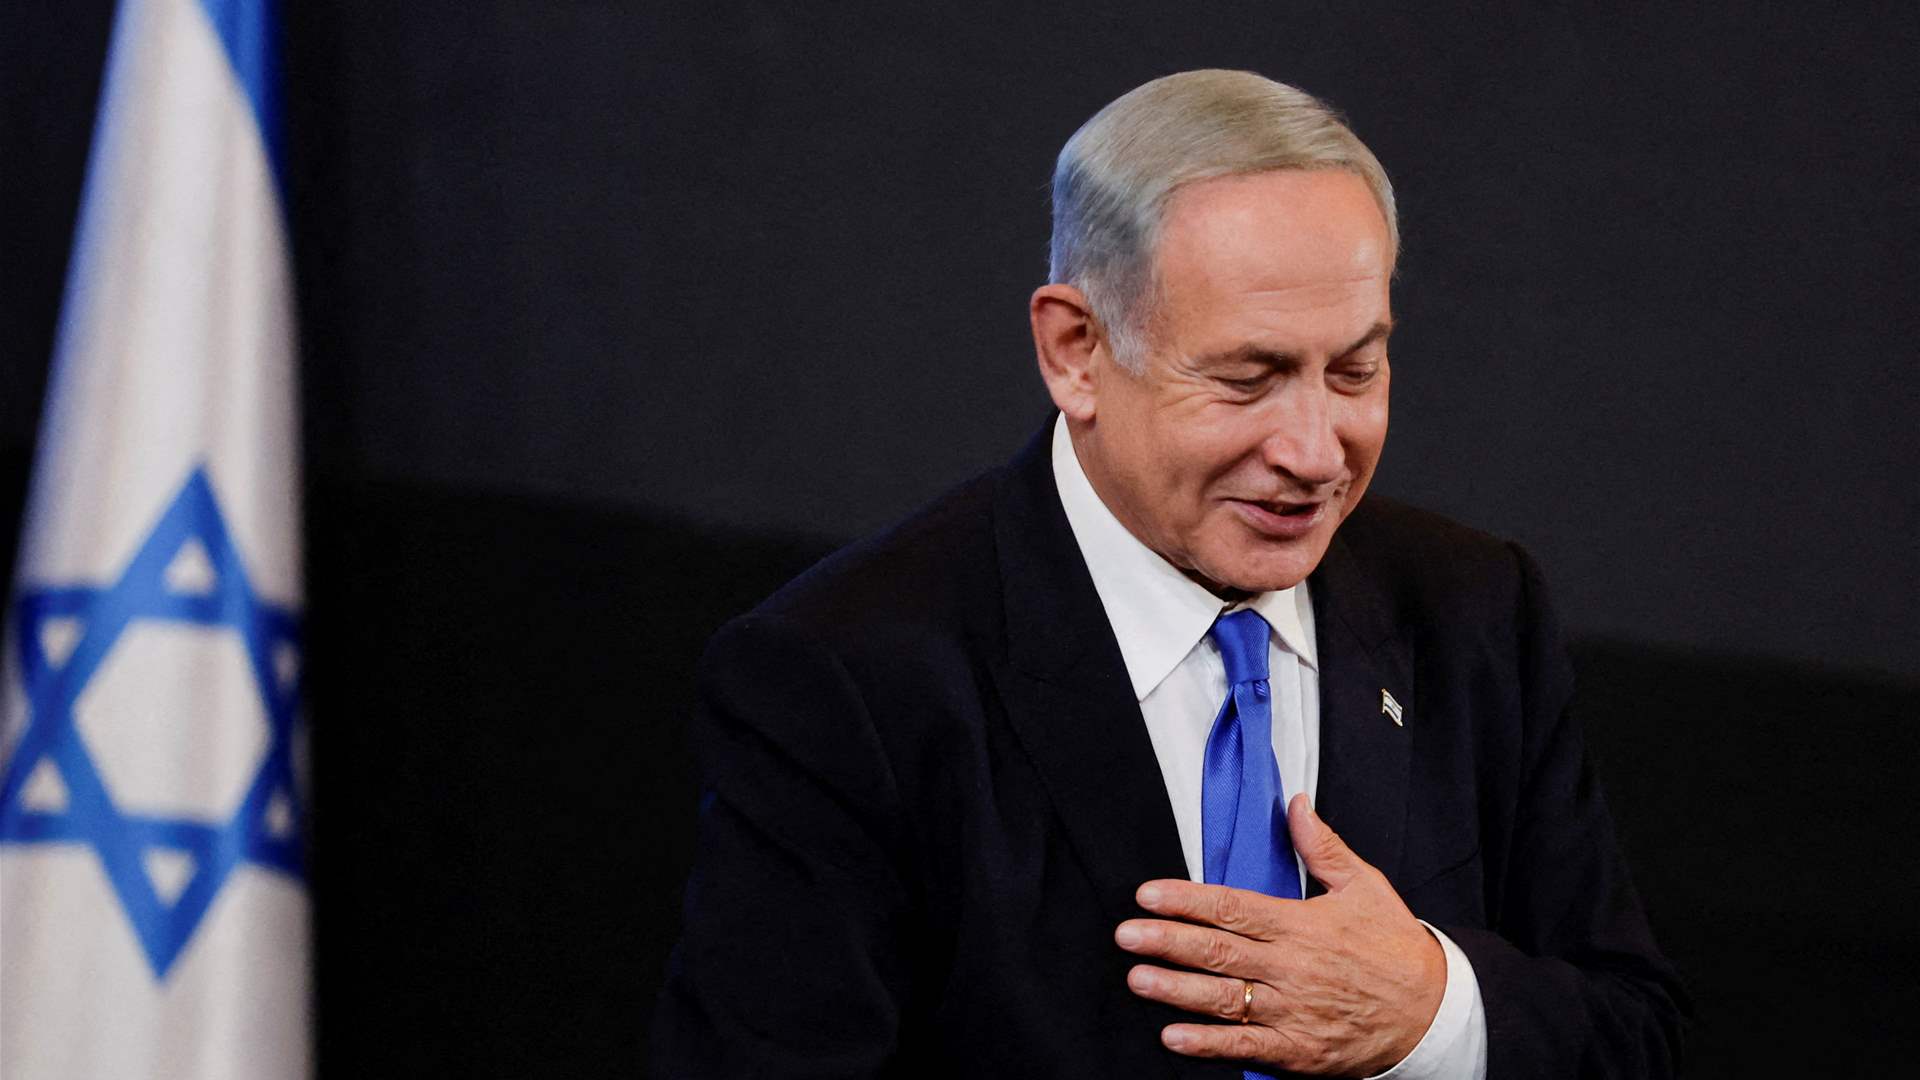 War or diplomacy: Netanyahu&#39;s critical choices and their impact on region